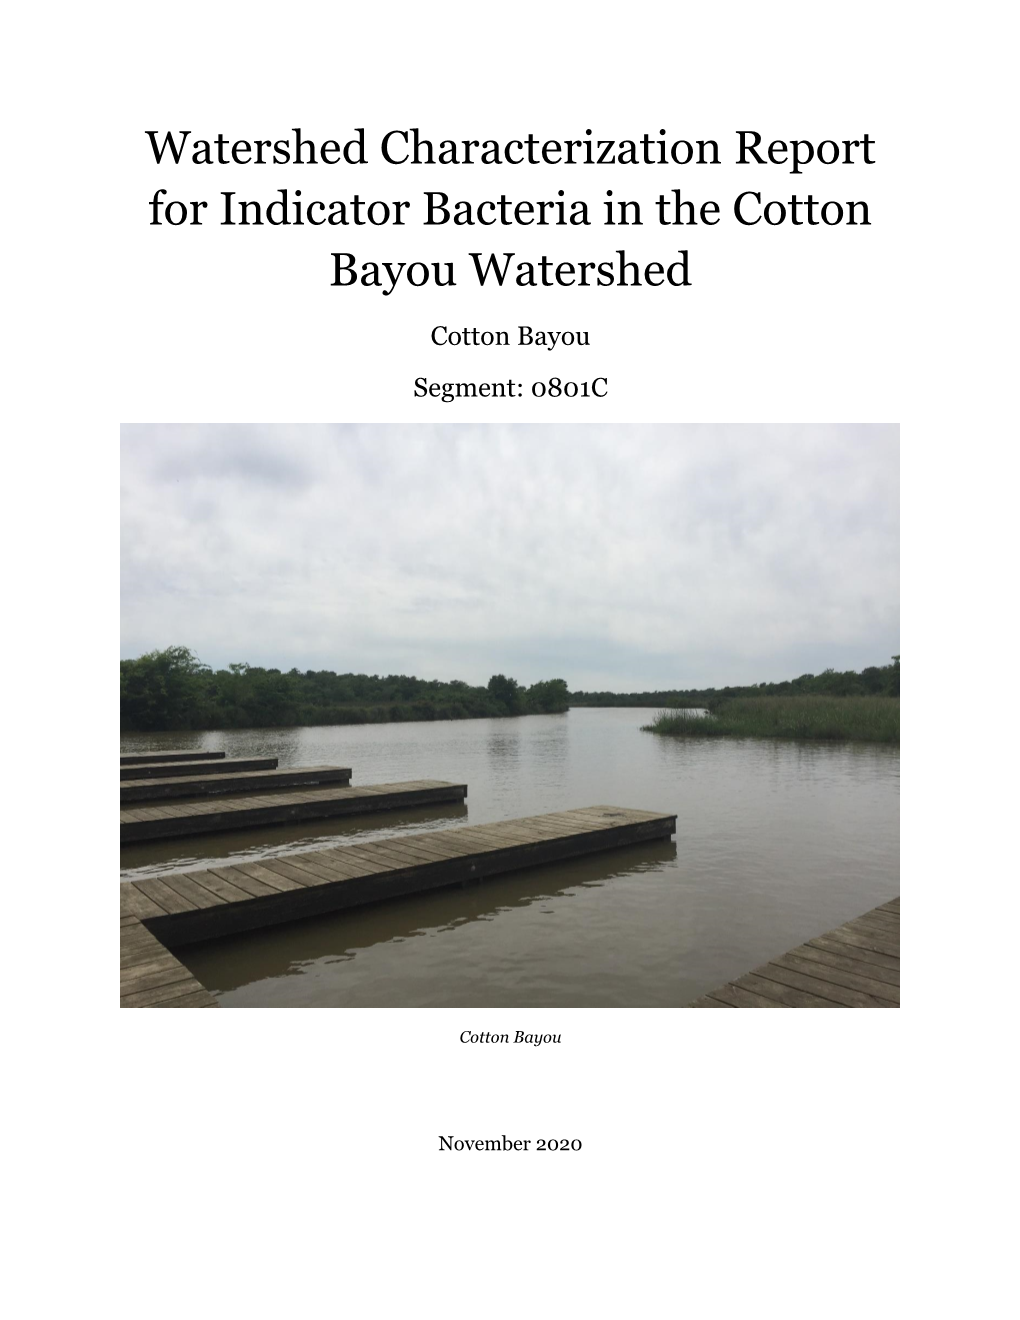 View Cotton Bayou Watershed Characterization Report